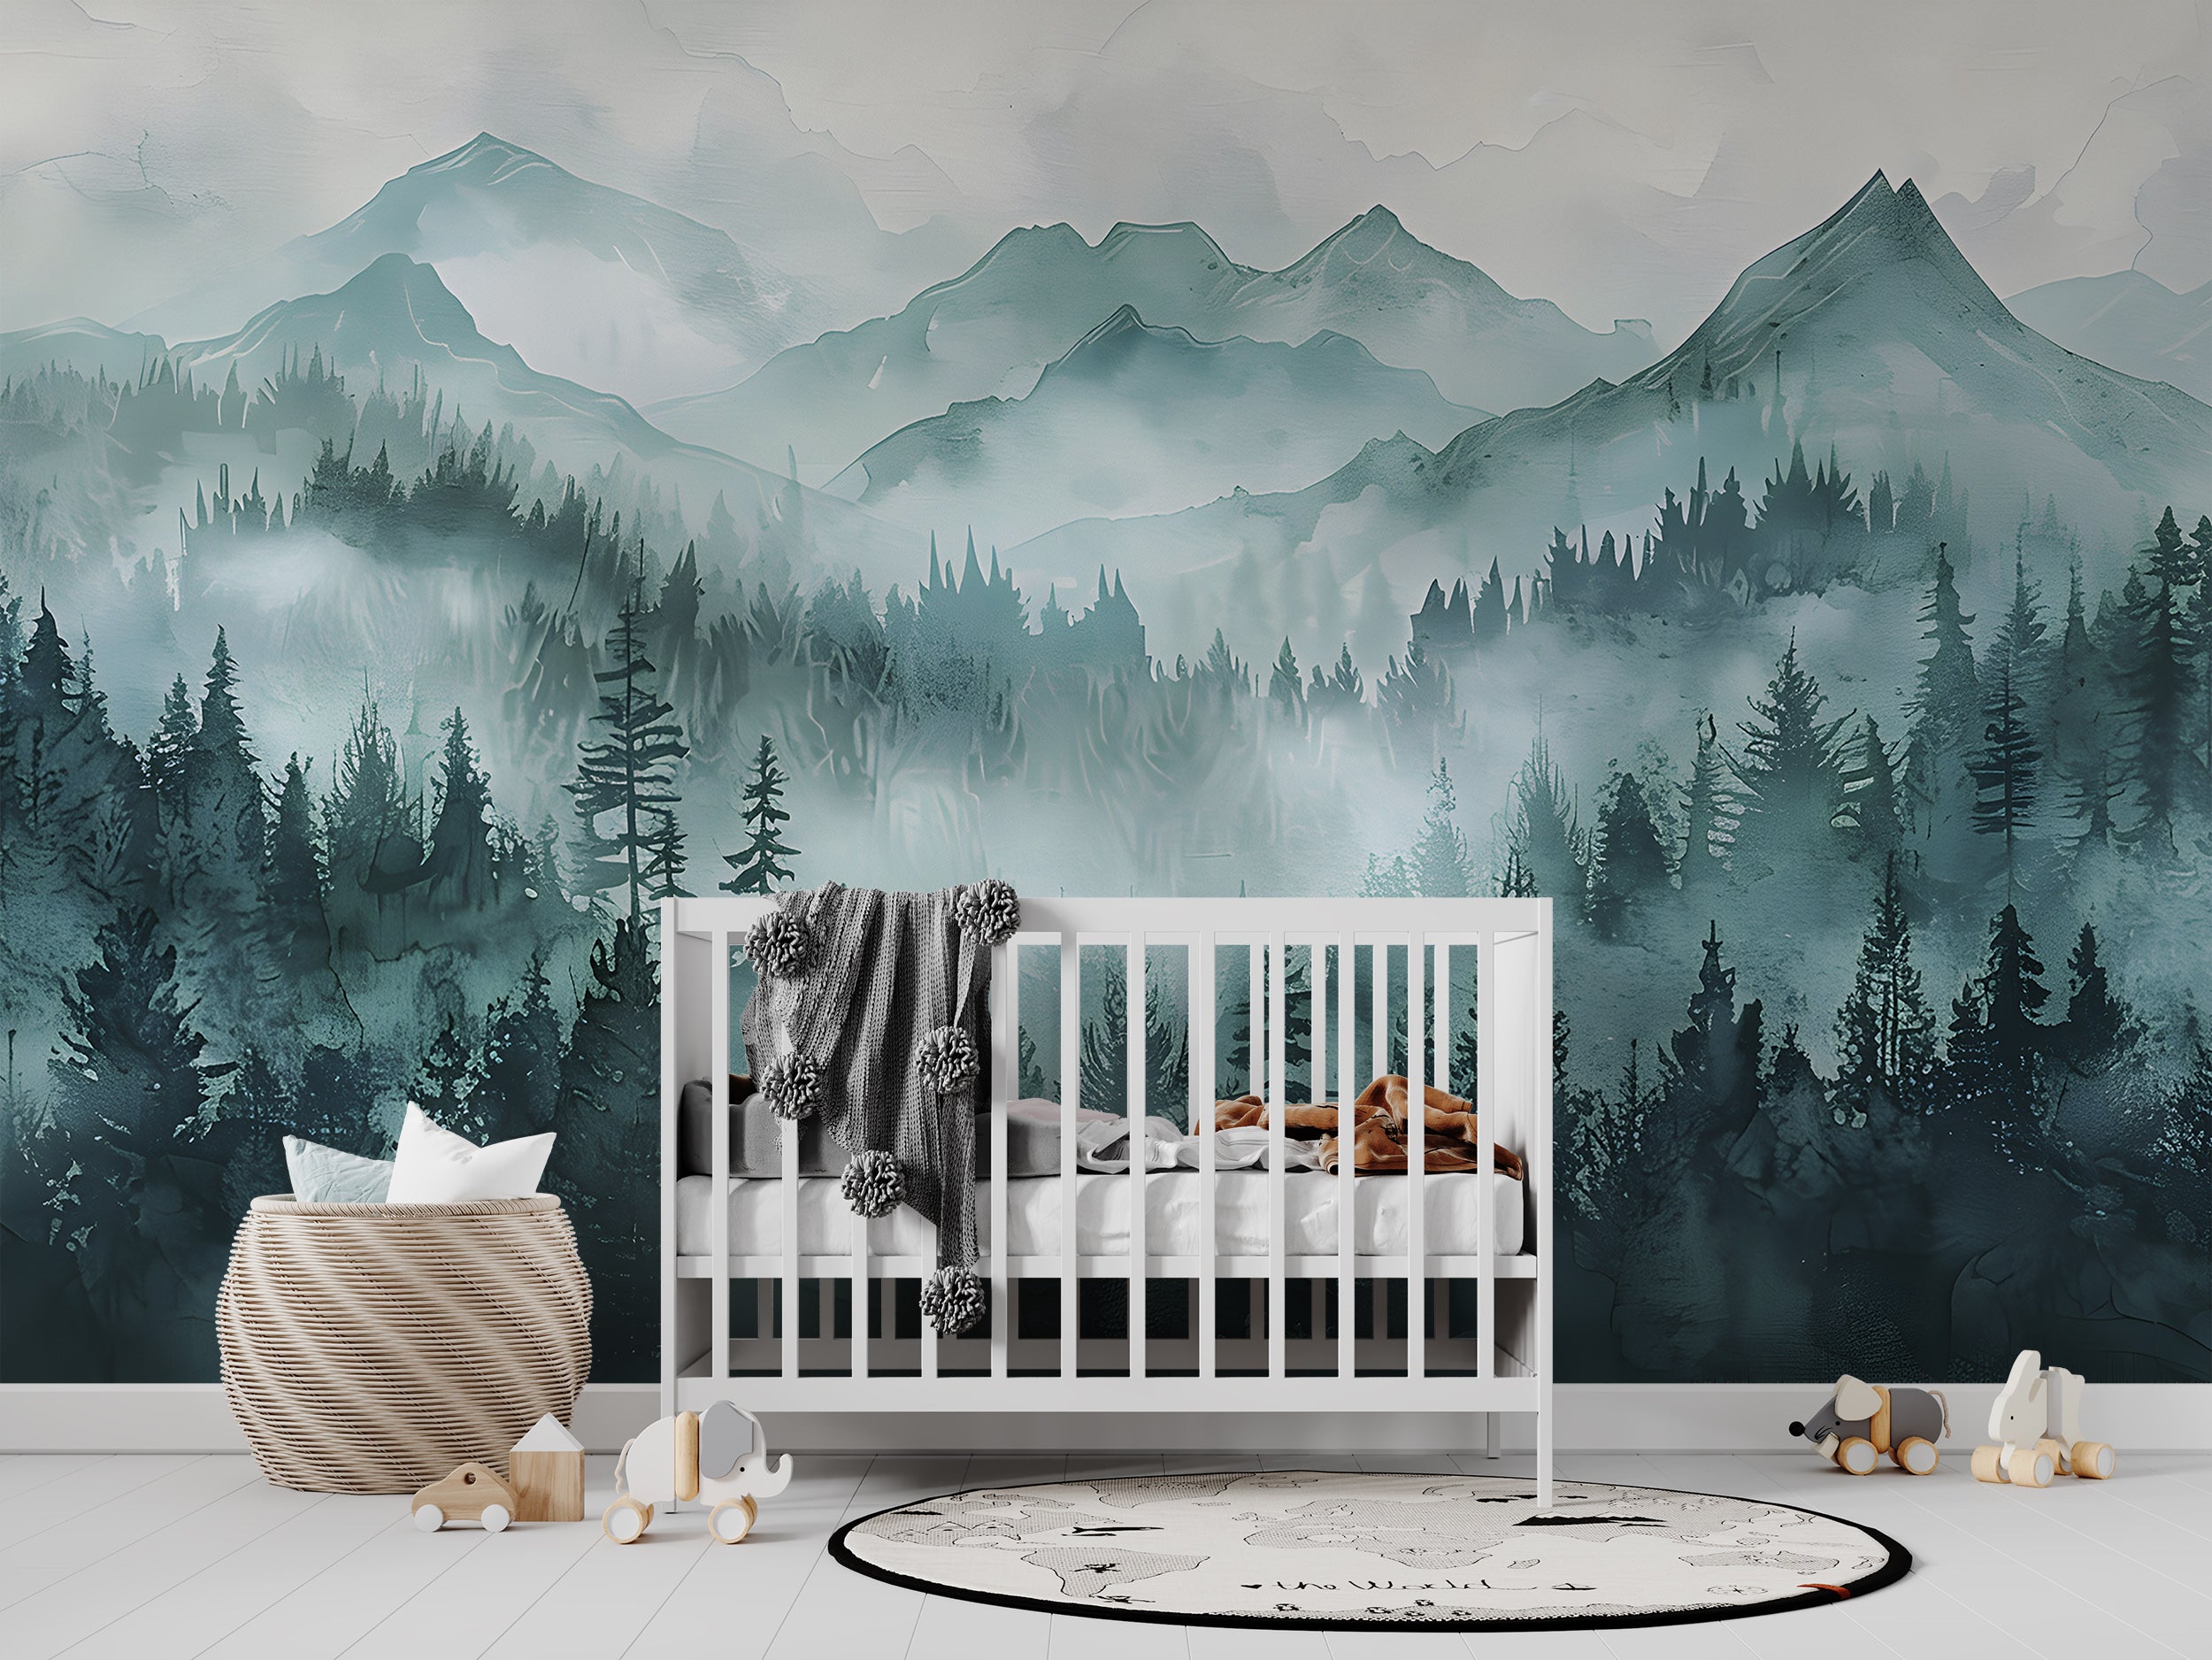 Watercolor Mountains and Forest Mural, Abstract Mint Mountain Wallpaper, Nursery Peel and Stick Soft Green Landscape Mural, PVC free Decor